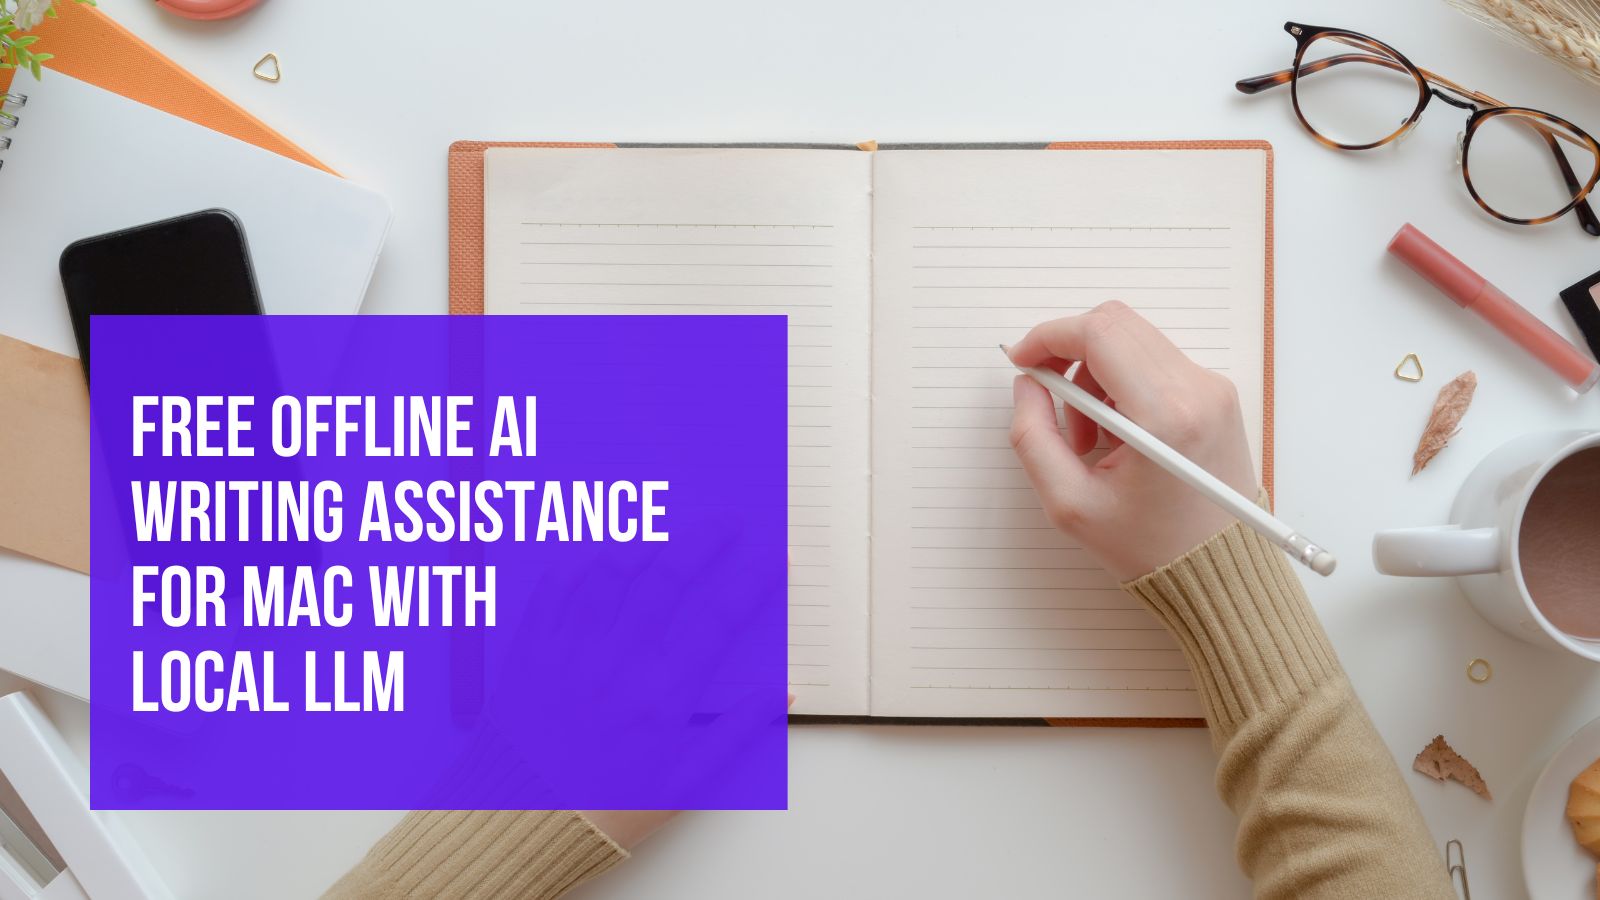 Free Offline AI Writing Assistance For Mac With Local LLM